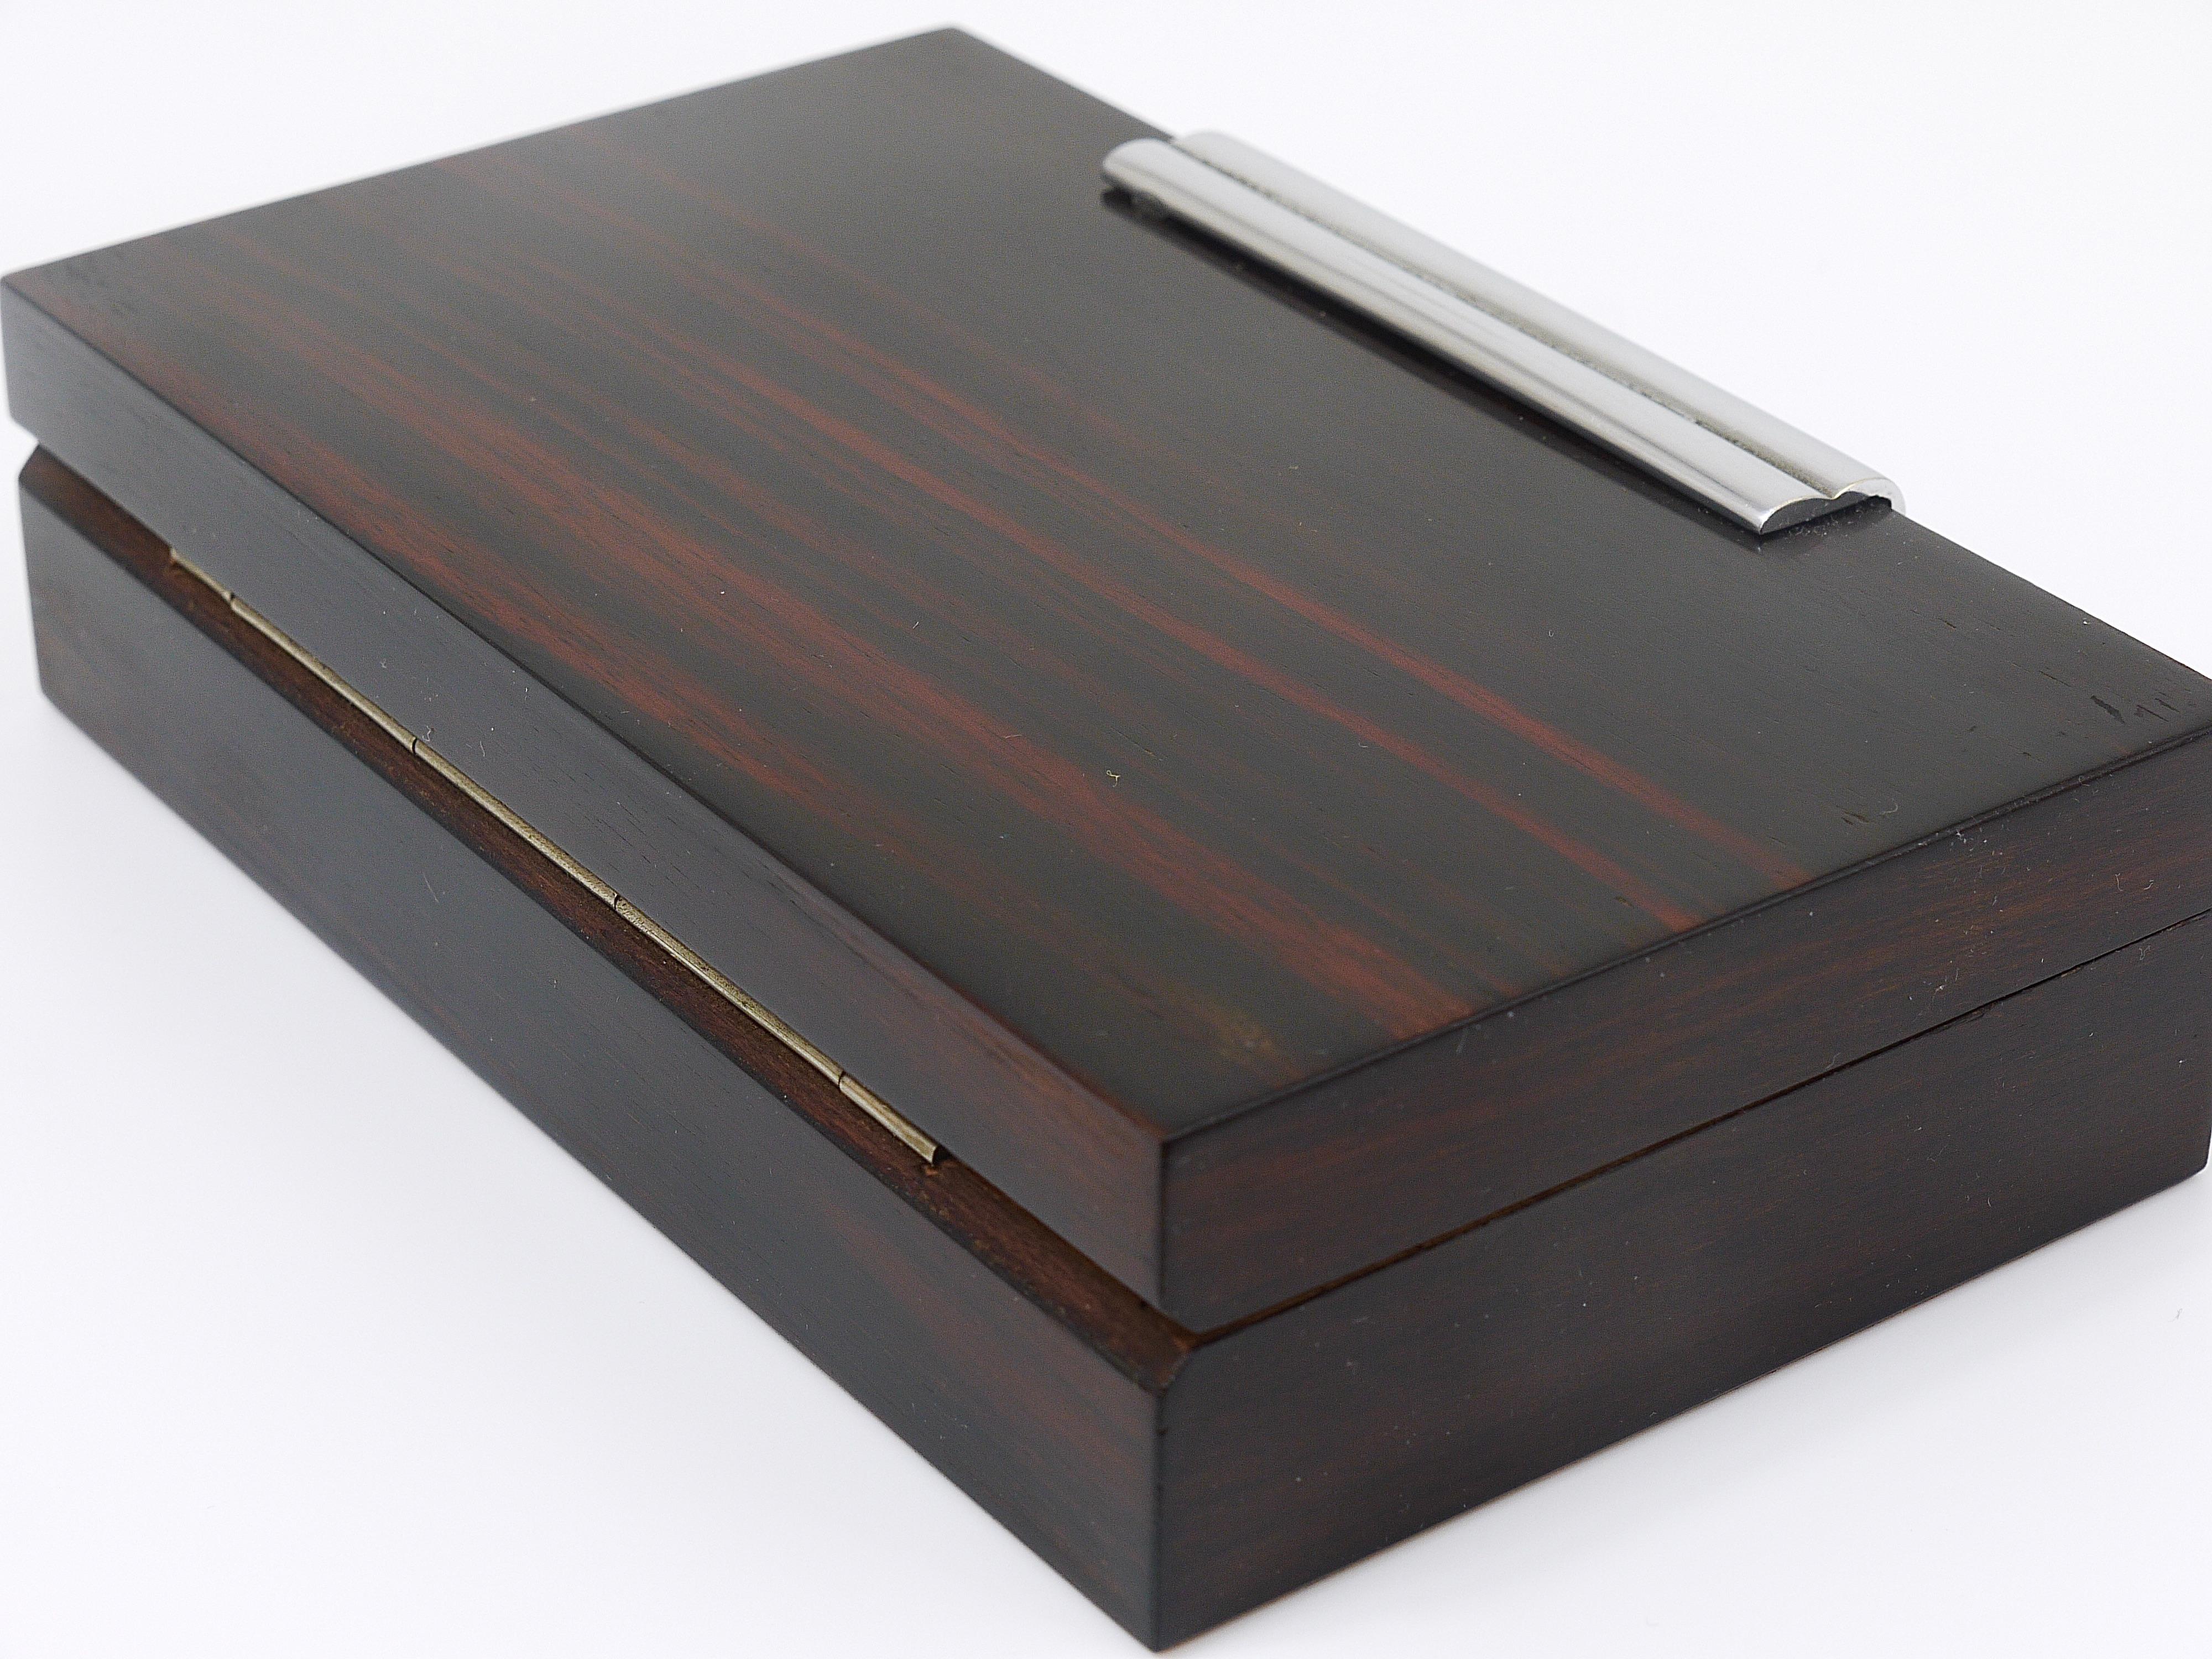 French Art Deco Rosewood & Nickel Storage Box, Maison Desny Style, France, 1930s For Sale 16